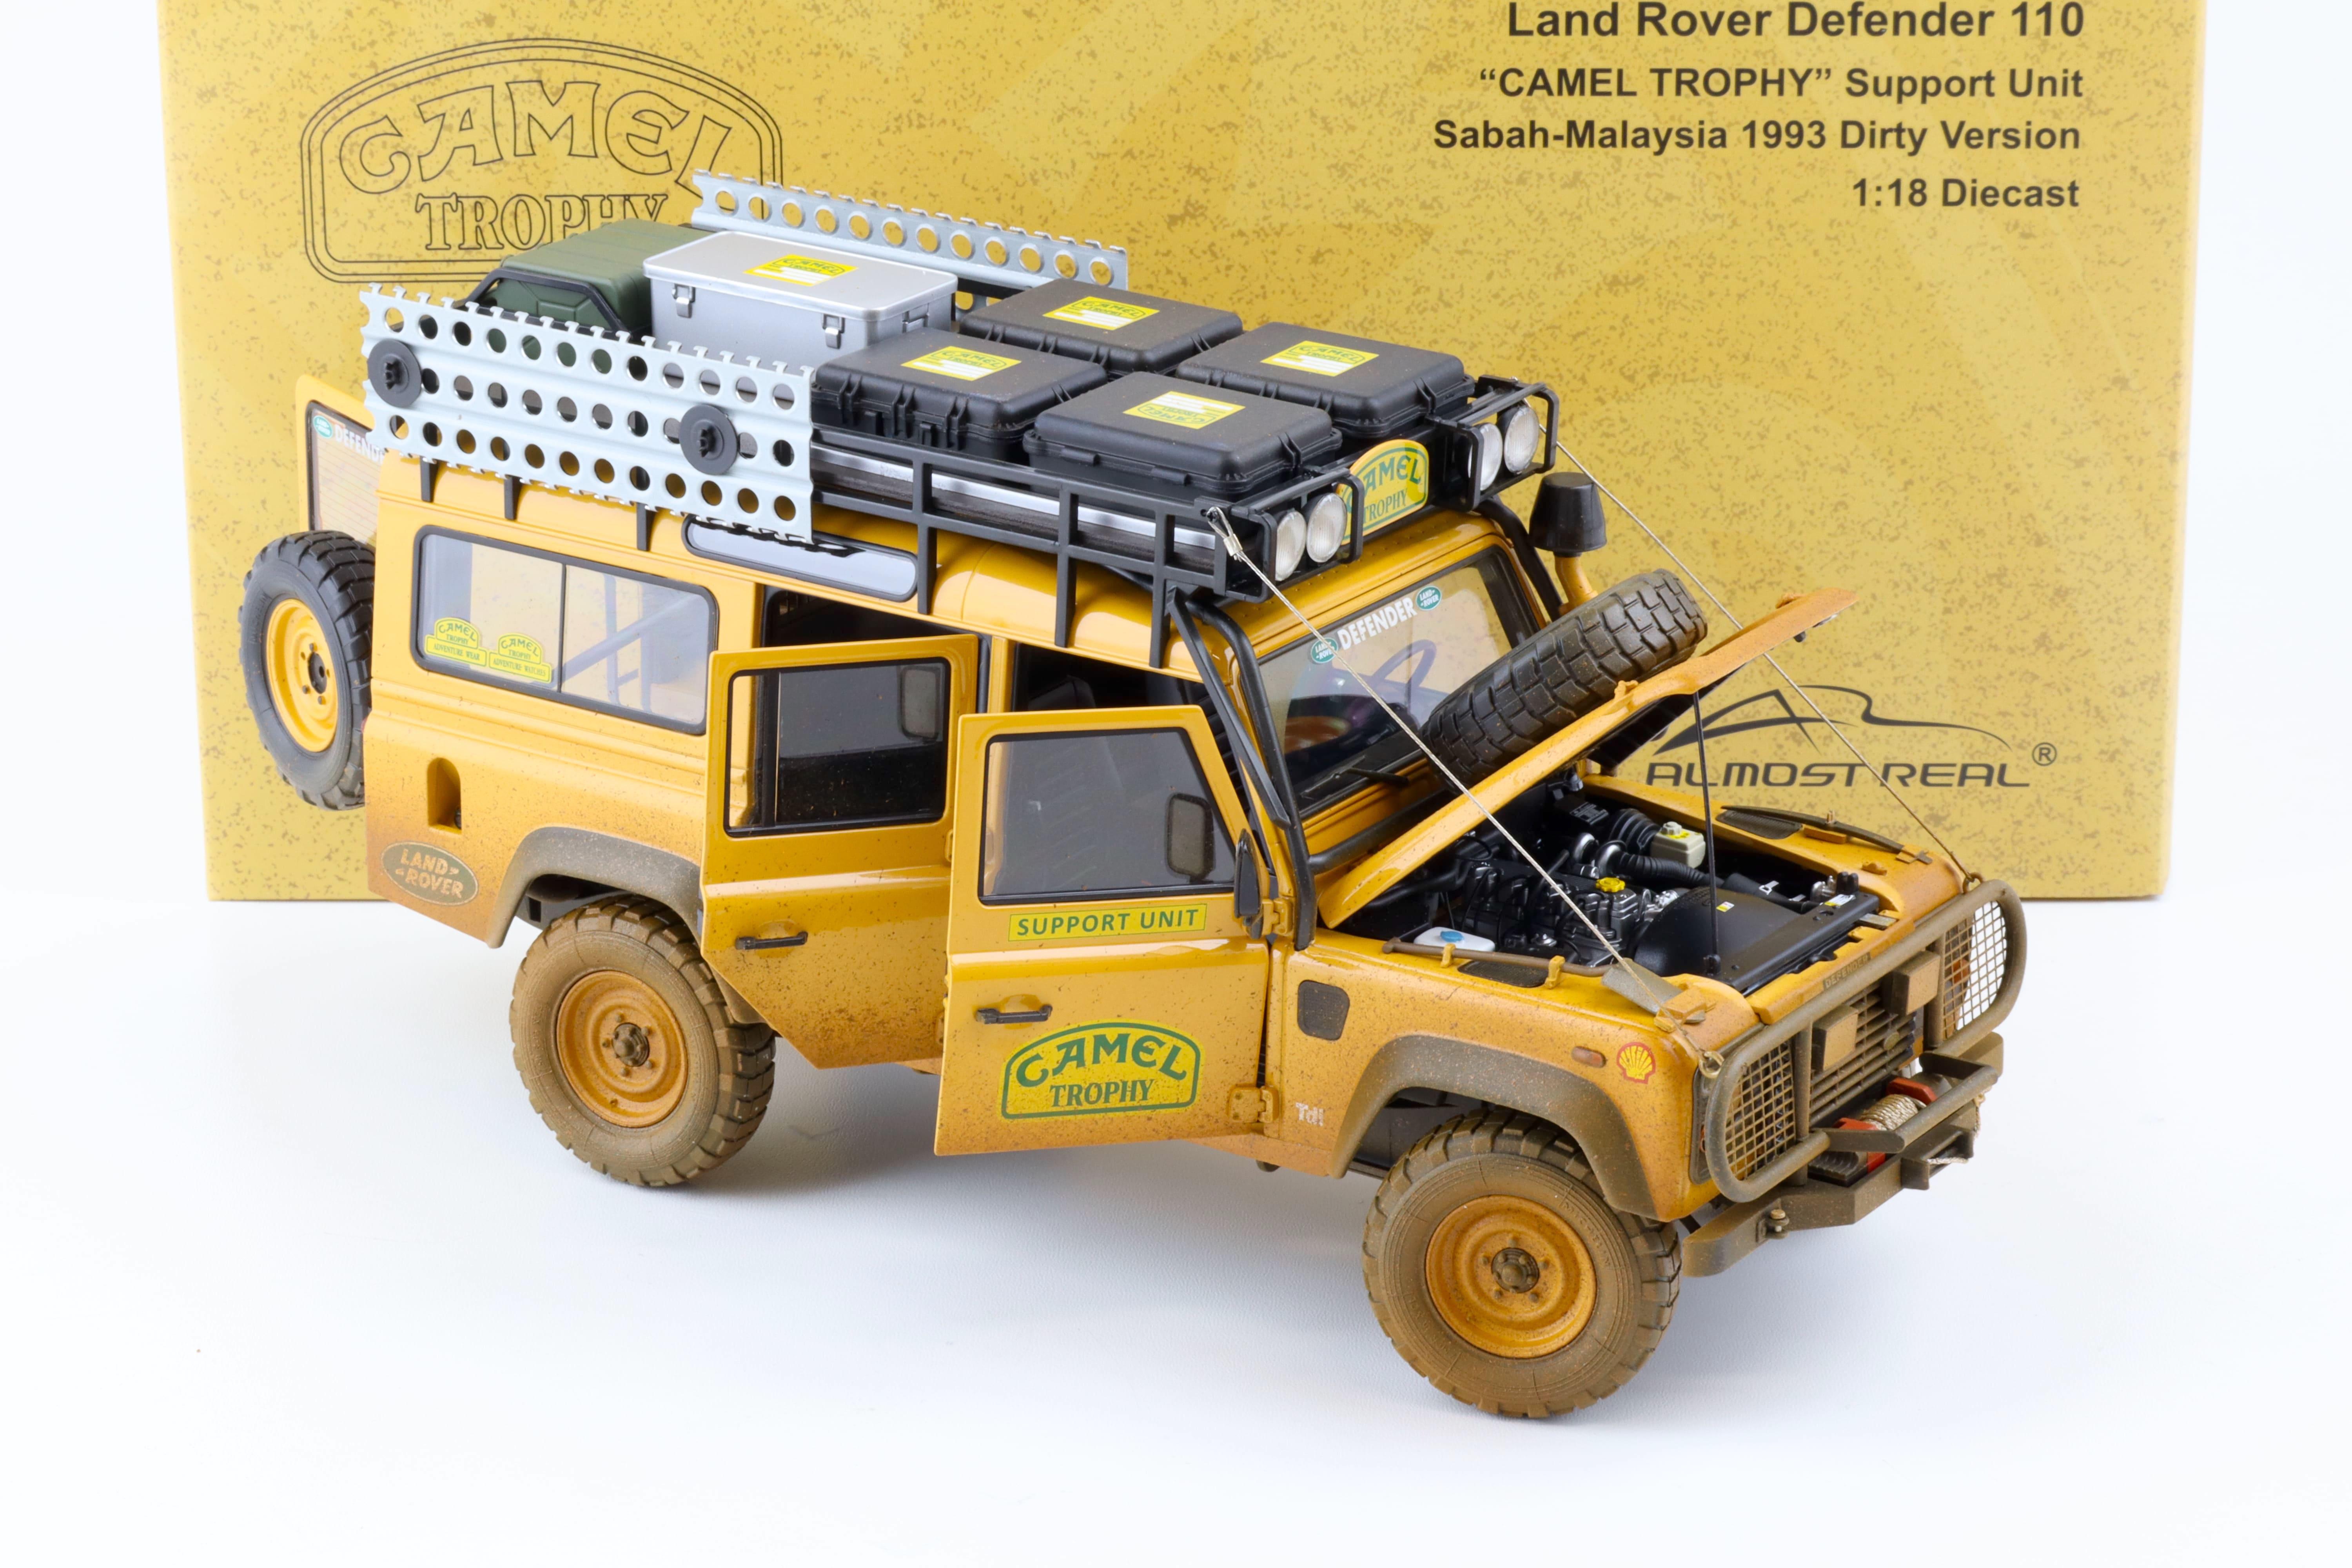 1:18 Almost Real Land Rover Defender 110 Camel Trophy Support Unit 1993 Dirty Version